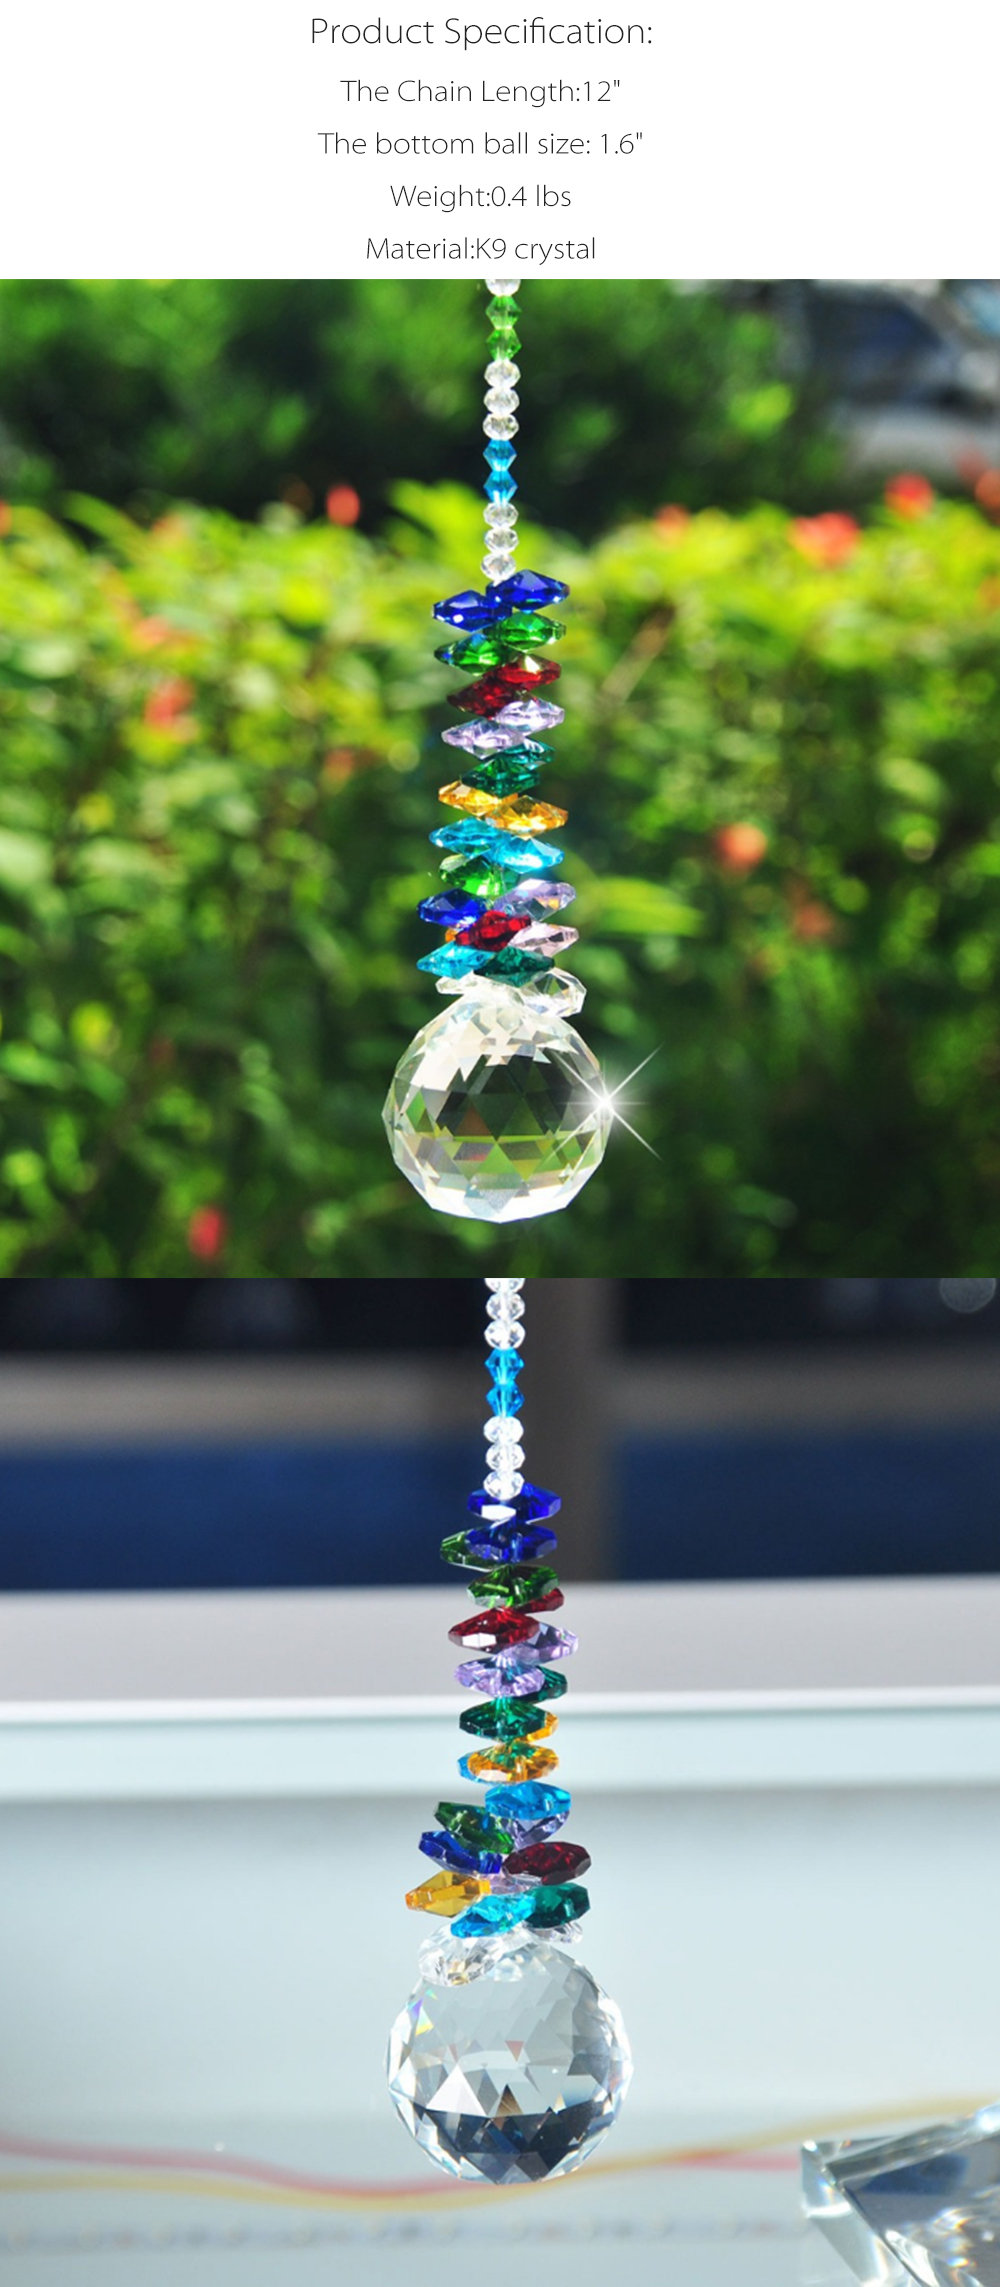 Details about   Neewer 20-Pack 1.75" Clear Crystal Ball Prism Pendant Suncatcher for Divination 